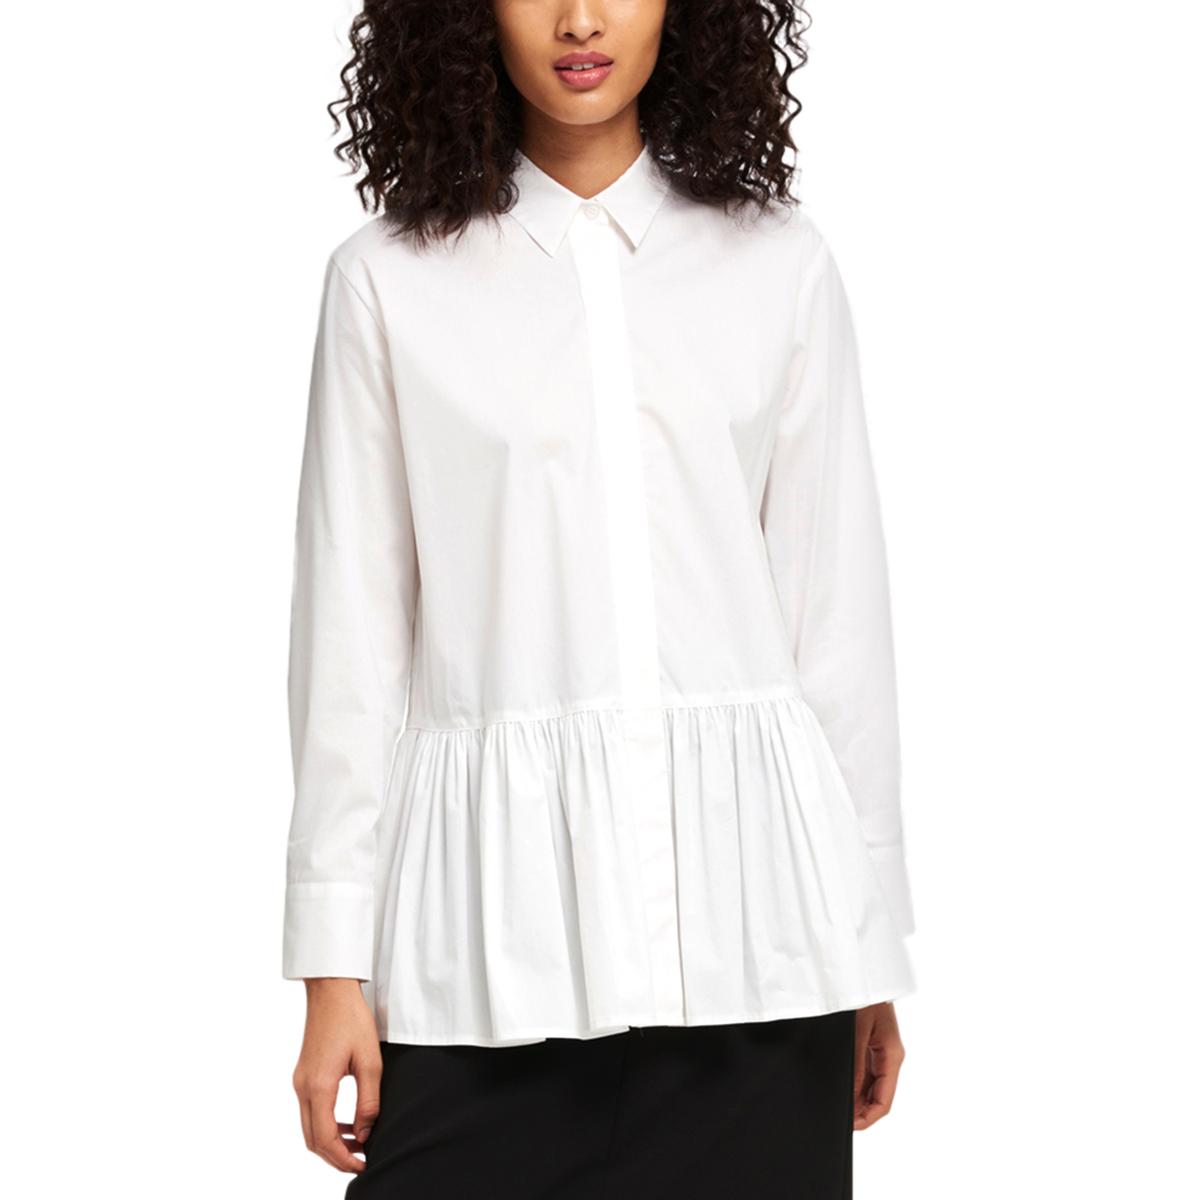 DKNY Womens White Button-Down Office Long Sleeves Peplum Top Blouse M ...